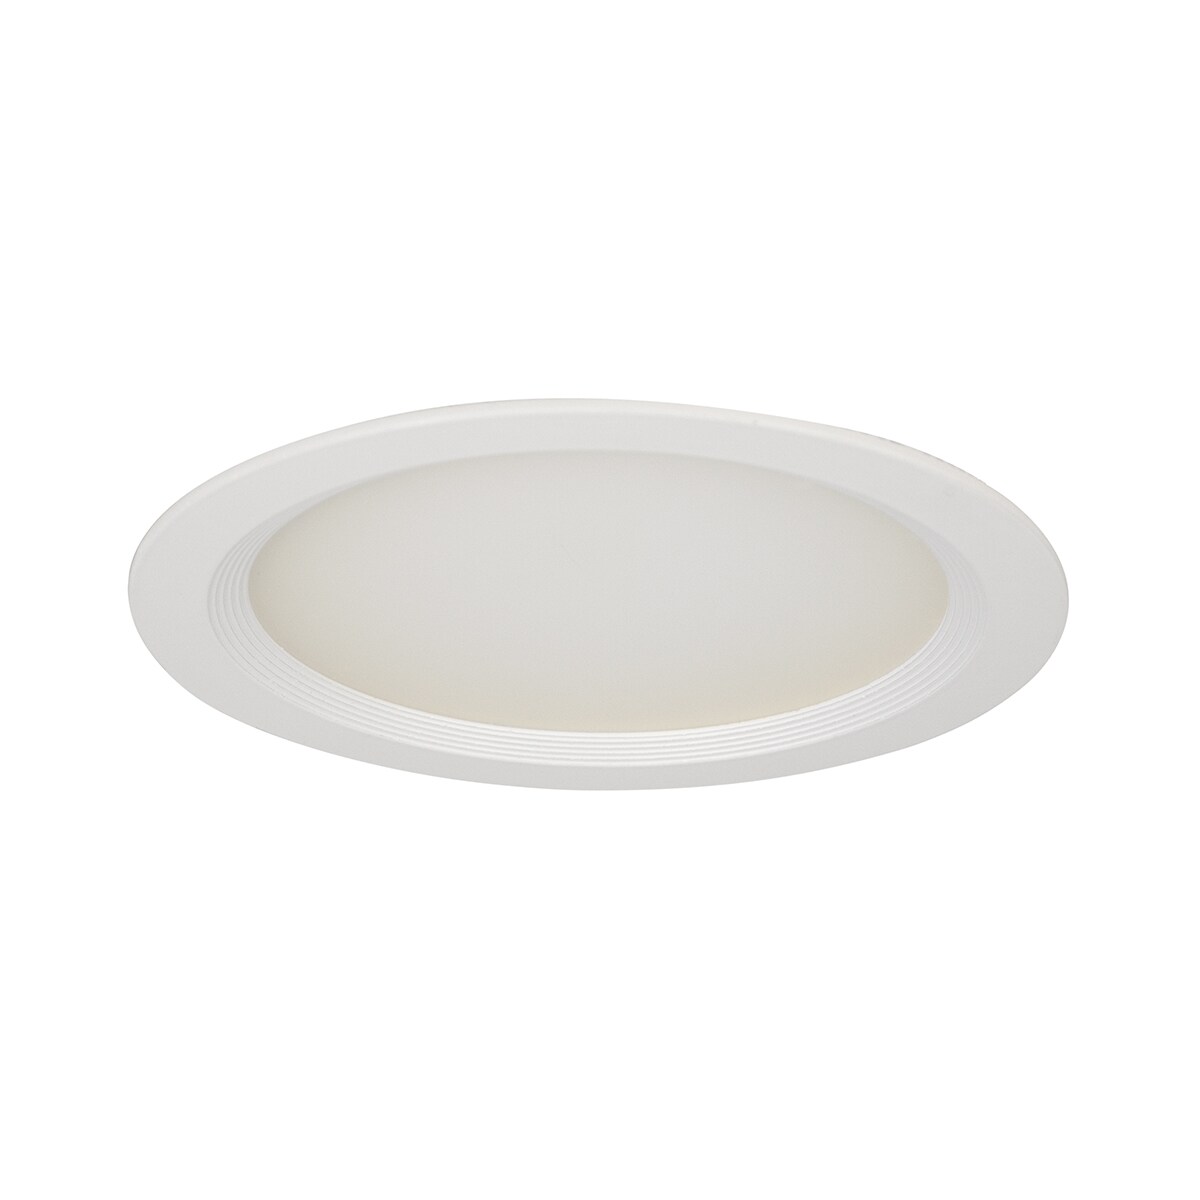 Dimmable Bazz SLMTB6W Box Recessed LED Kit Matte White 6-in Easy Installation Damp Location 